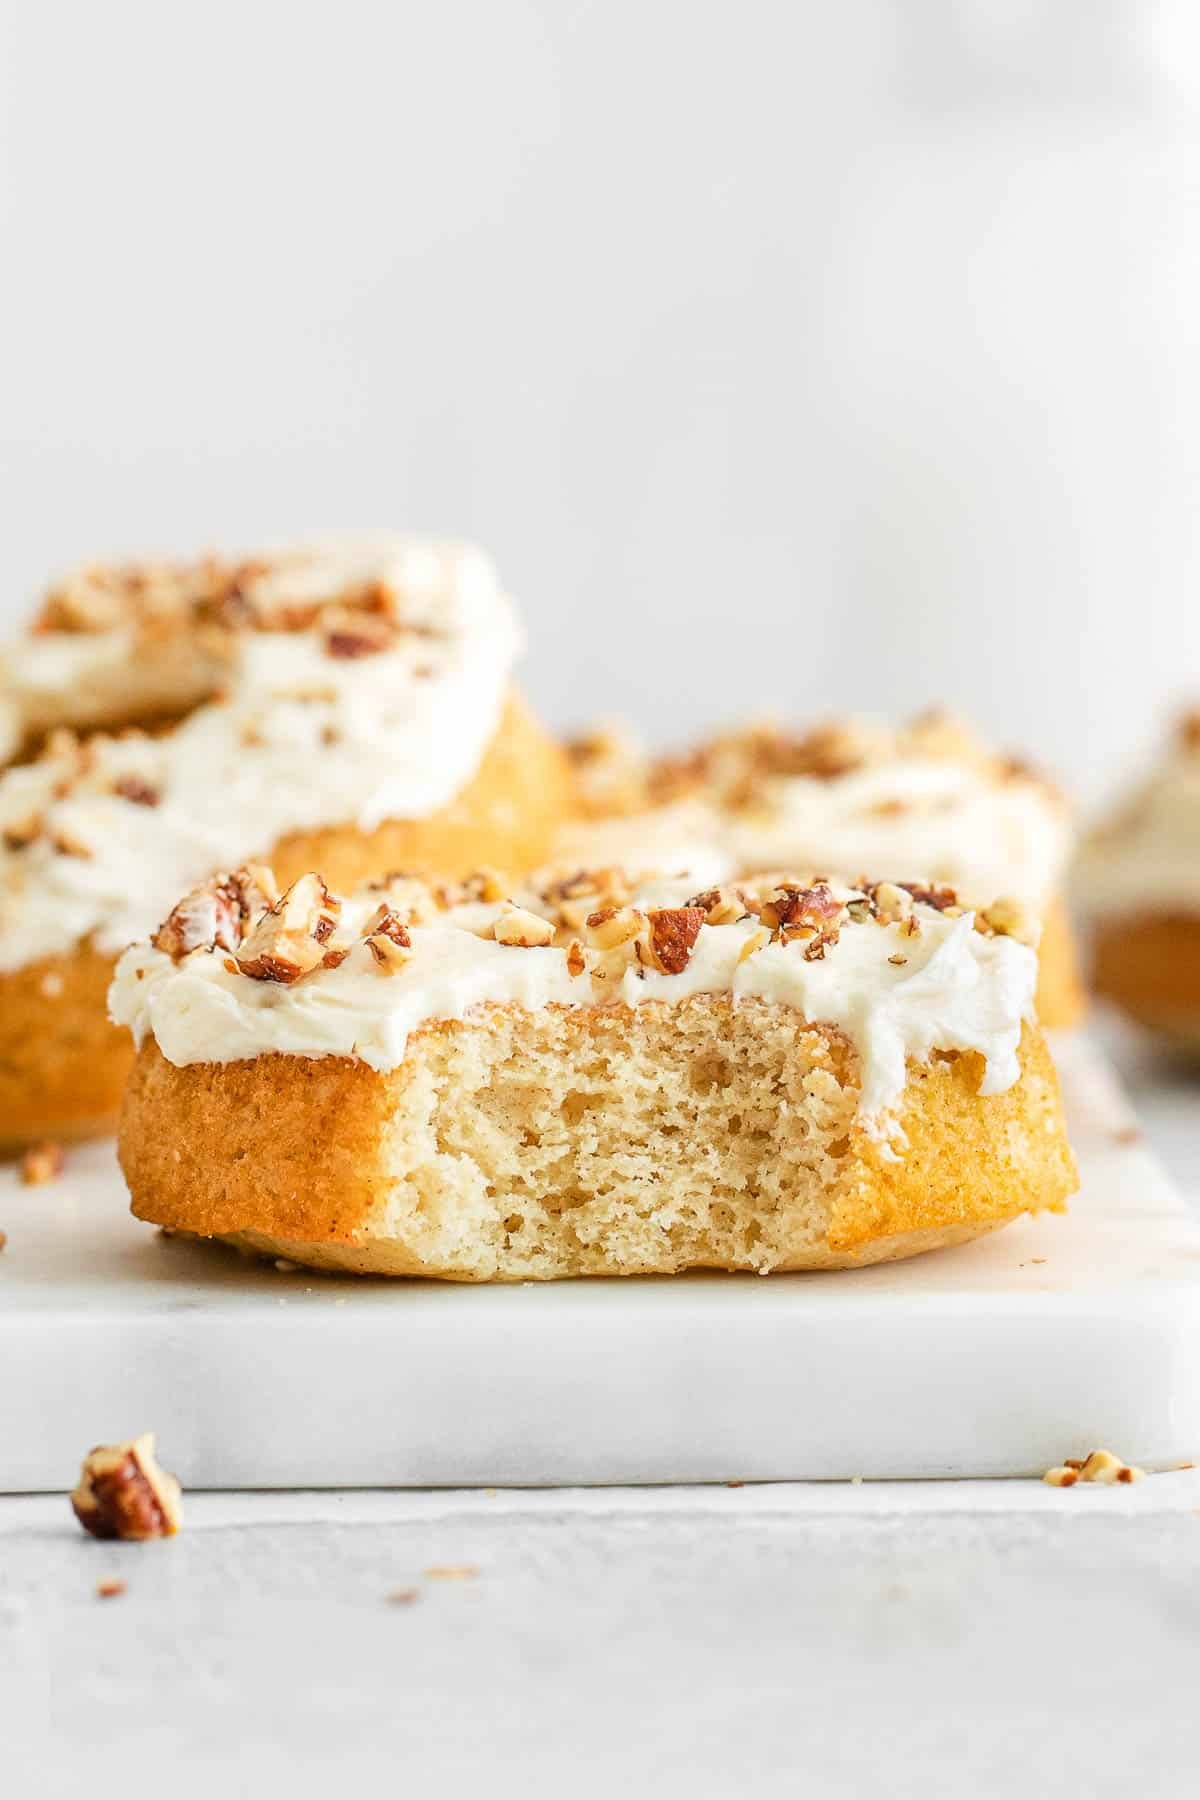 Maple donuts with a bite taken out topped with frosting and pecans on a white cutting board.